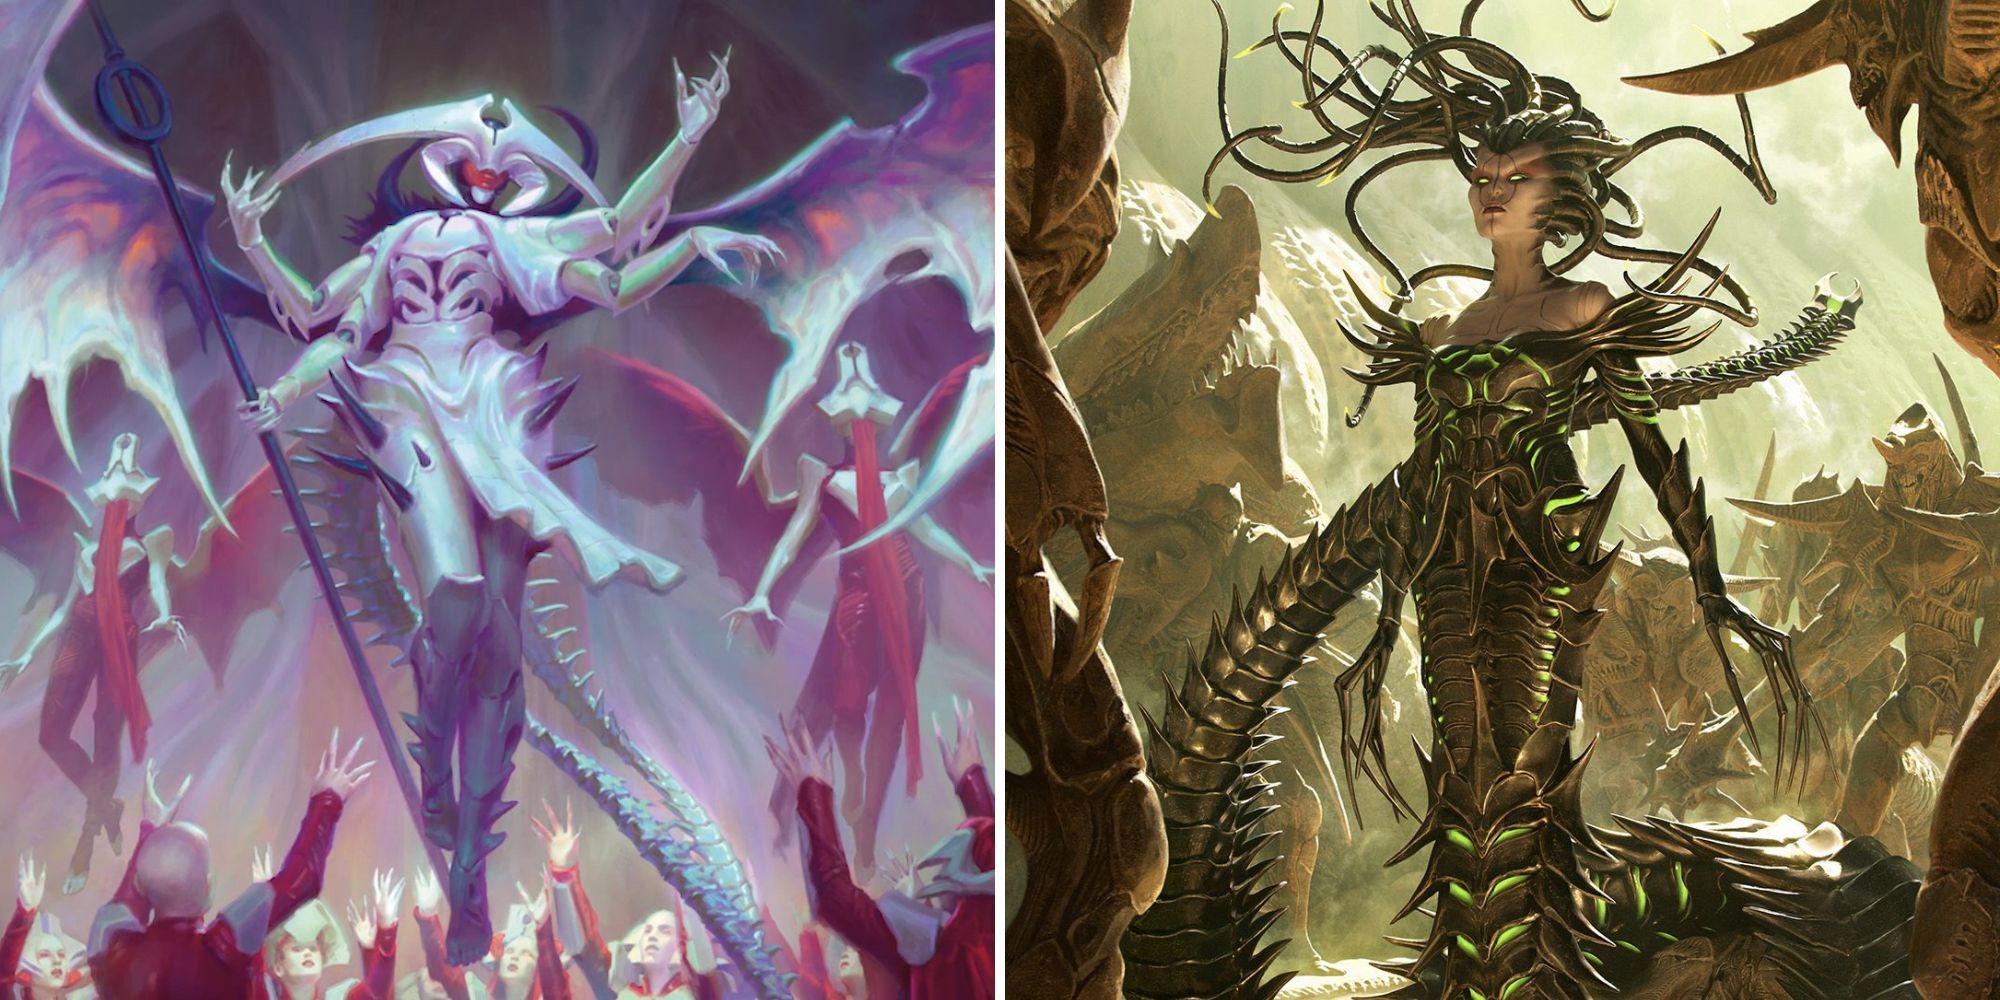 Atraxa and Vraska with minions or guards behind them